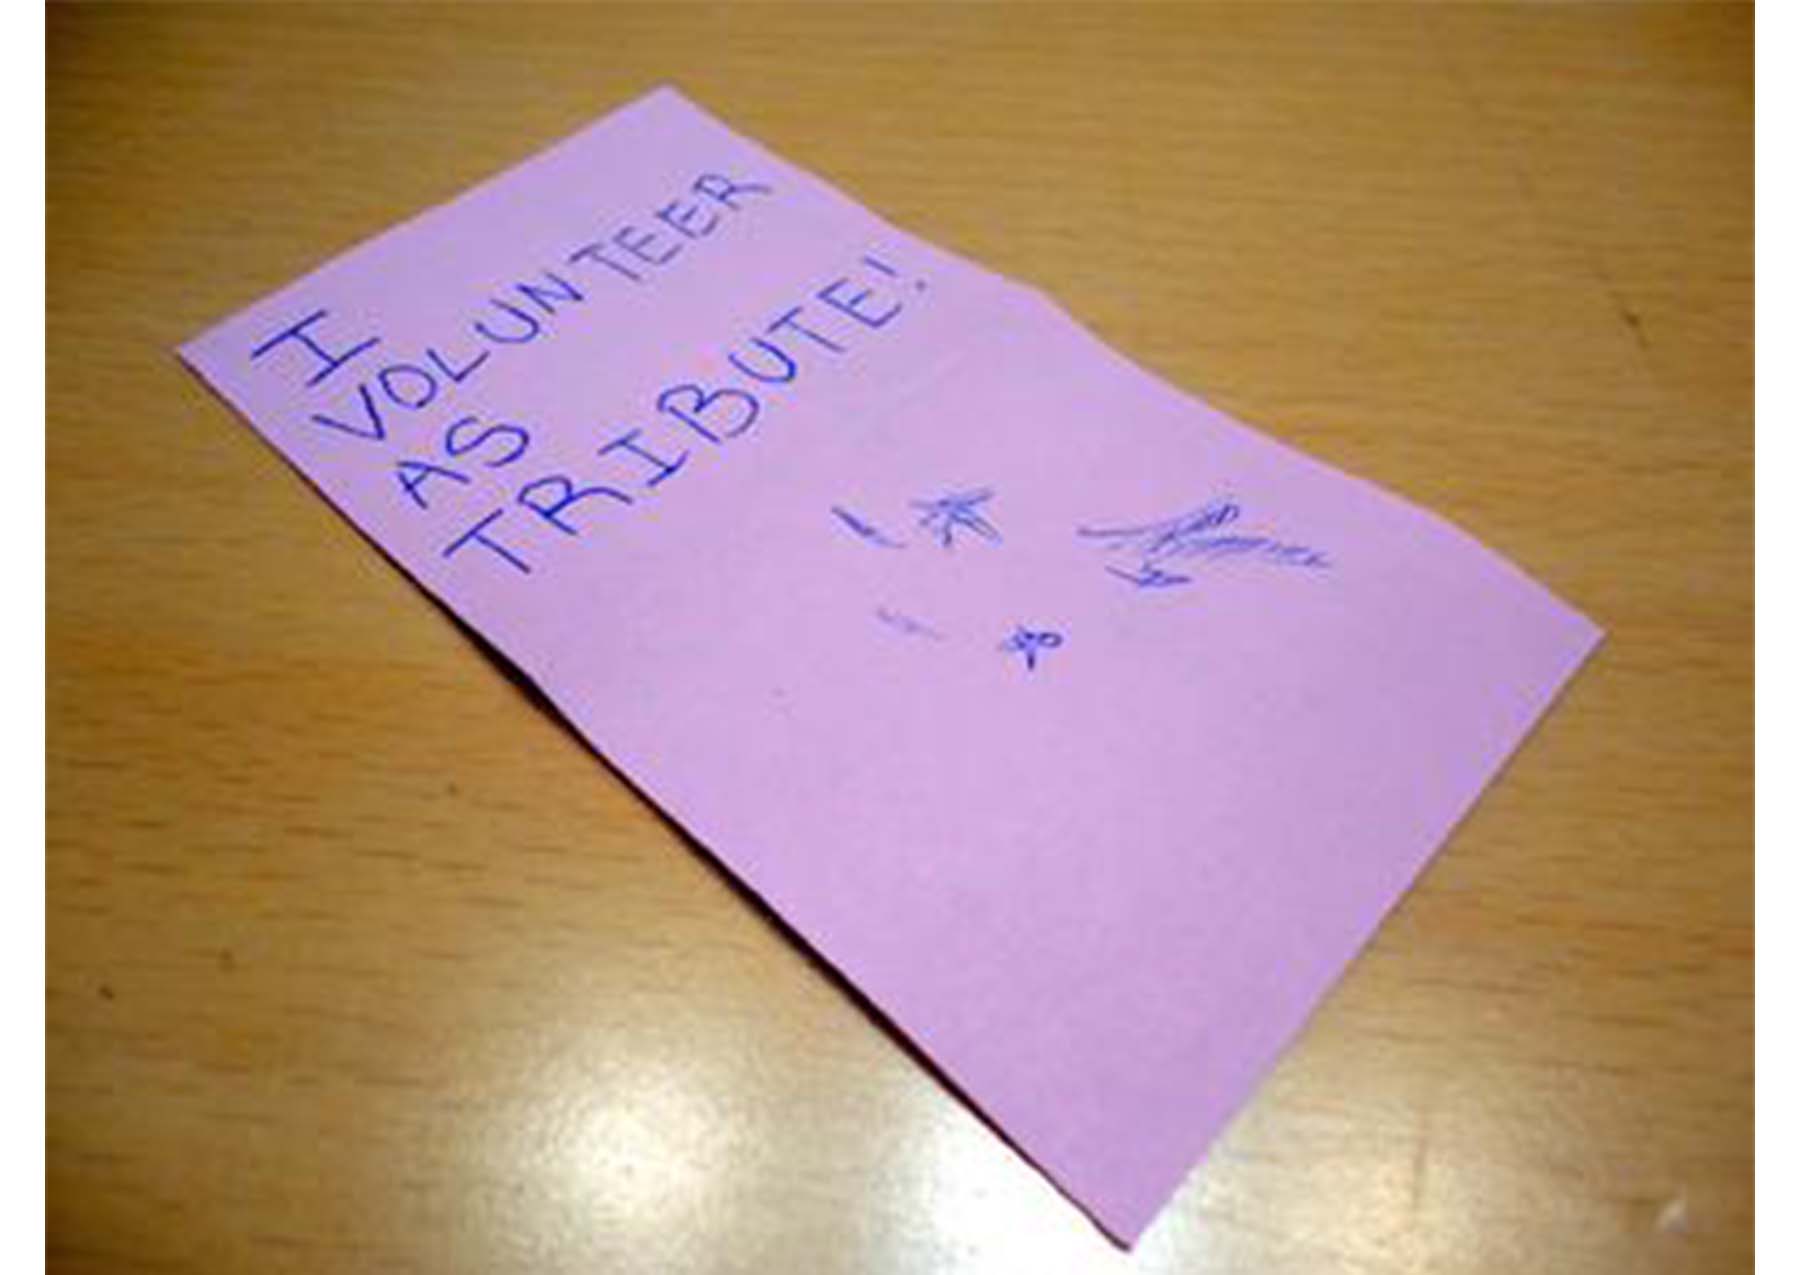 purple slip of paper with "I VOLUNTEER AS TRIBUTE!" written on it, sitting on a wooden tabletop